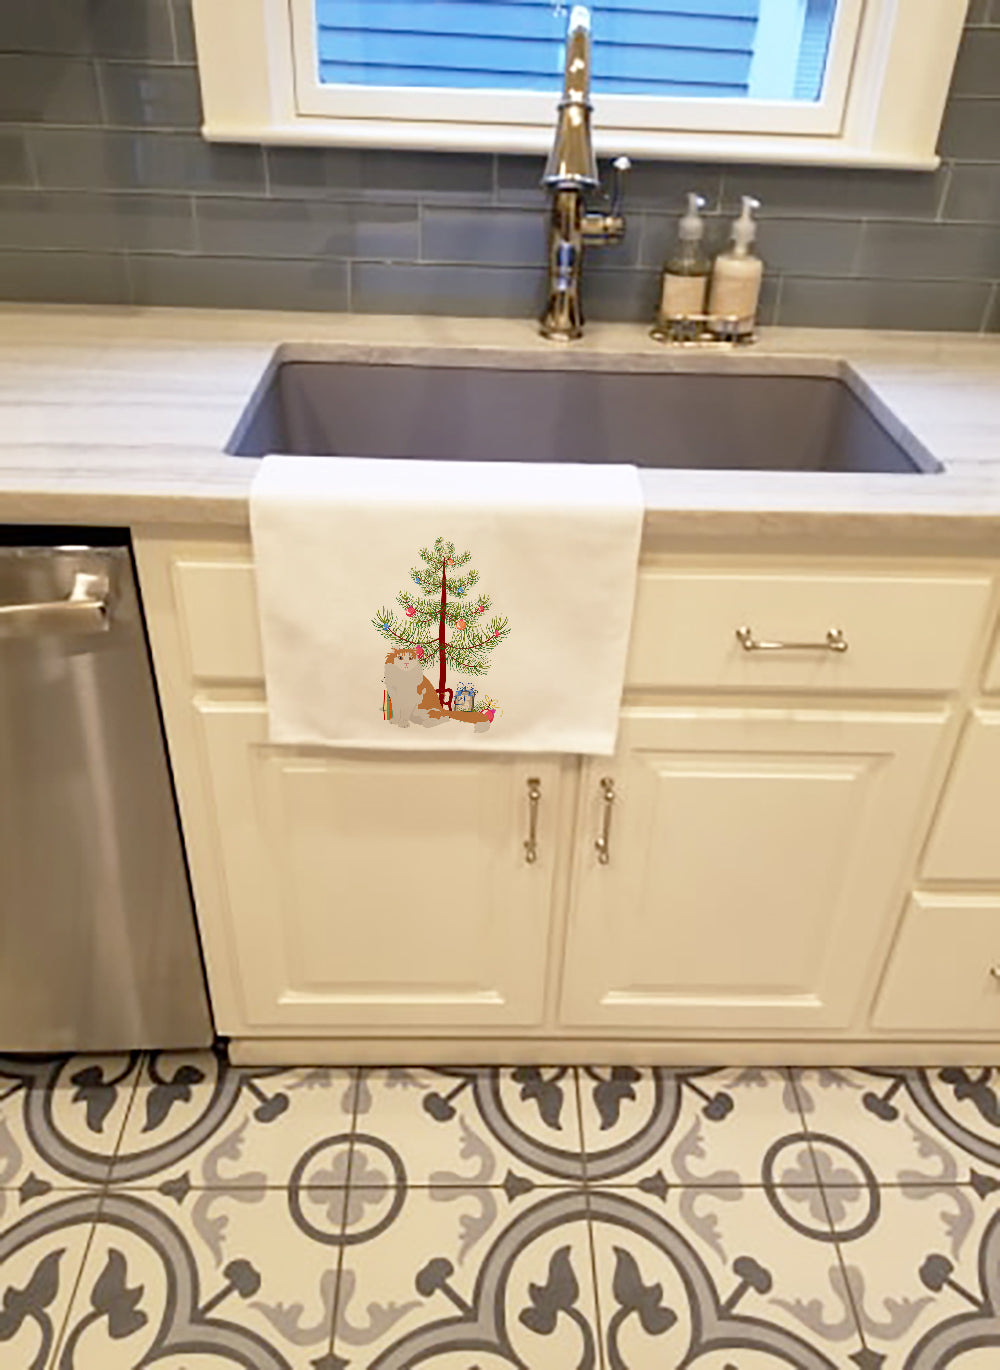 Buy this American Curl Cat Merry Christmas White Kitchen Towel Set of 2